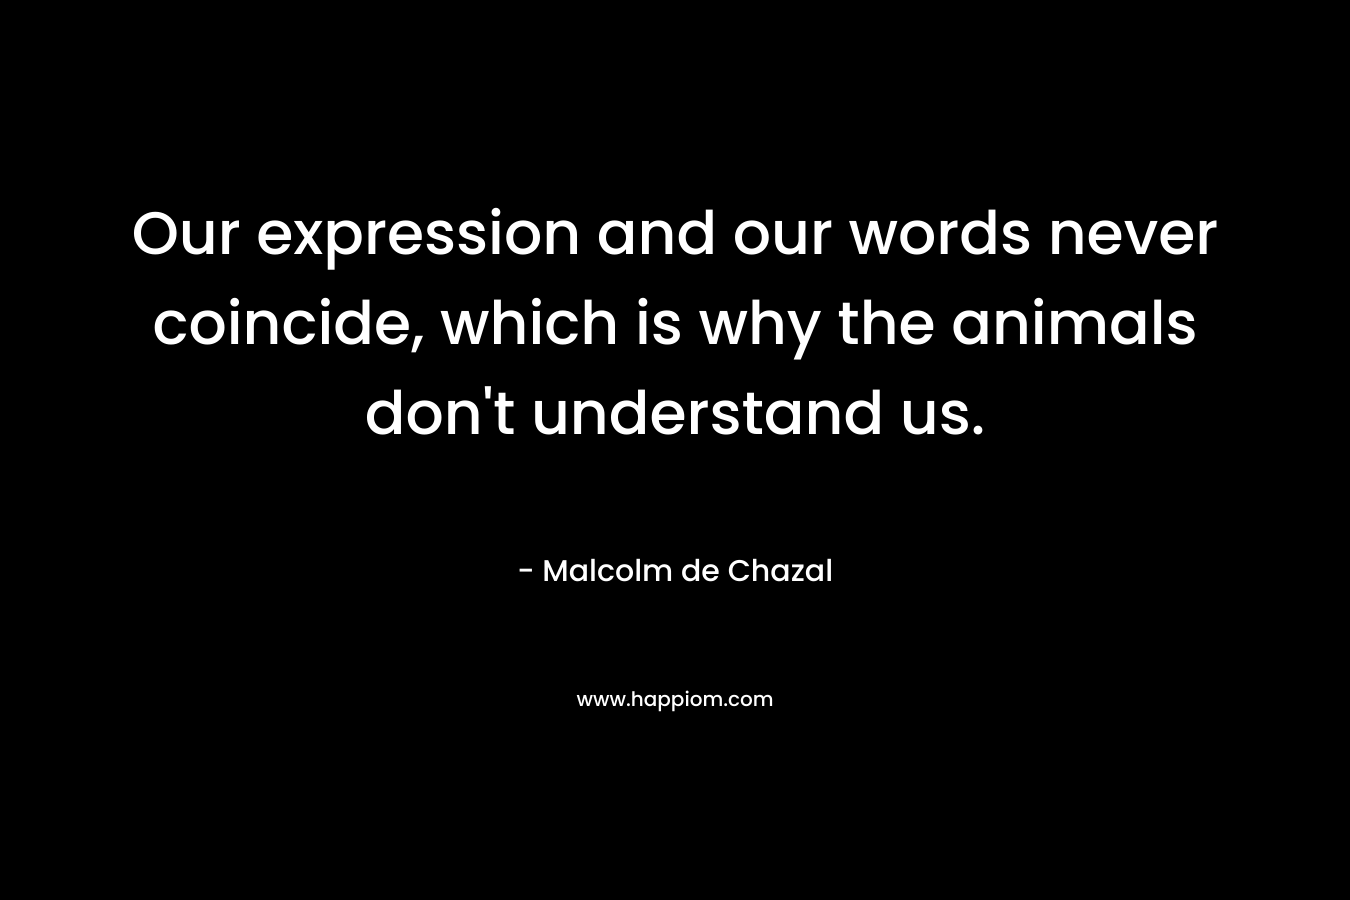 Our expression and our words never coincide, which is why the animals don’t understand us. – Malcolm de Chazal